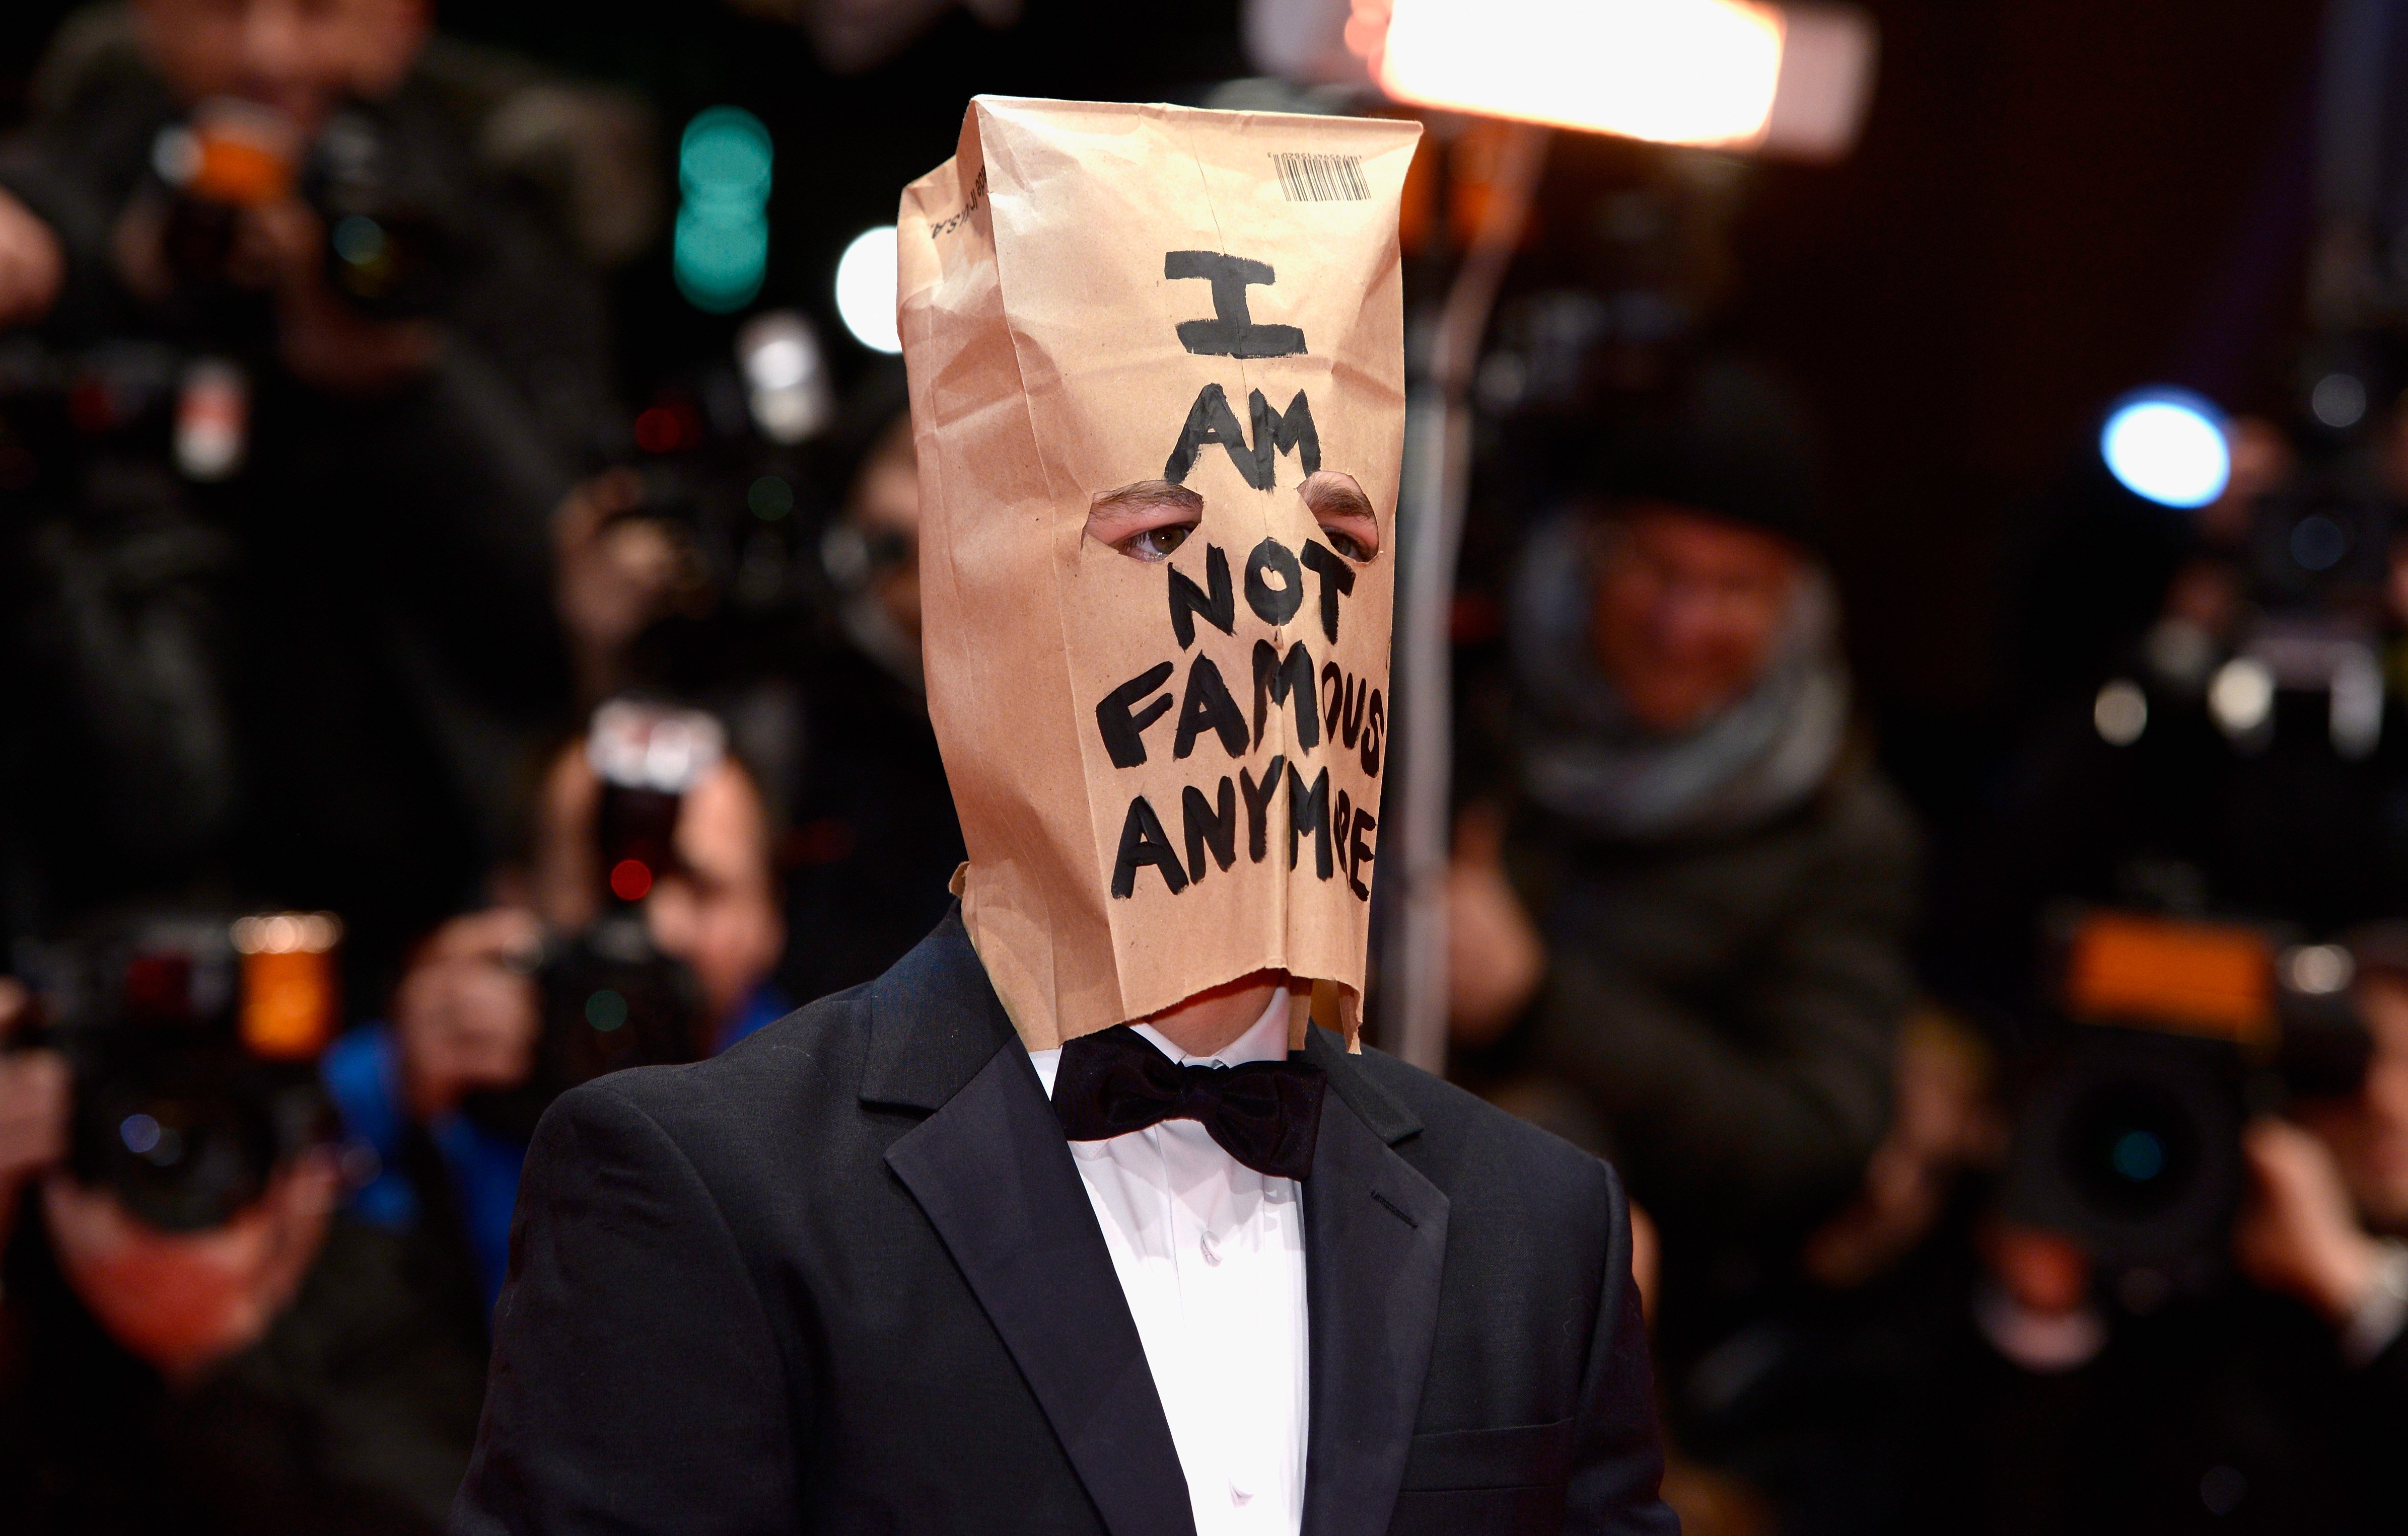  Shia LaBeouf at the “Nymphomaniac Volume I” premiere on February 9, 2014 in Berlin. | Source: Getty Images